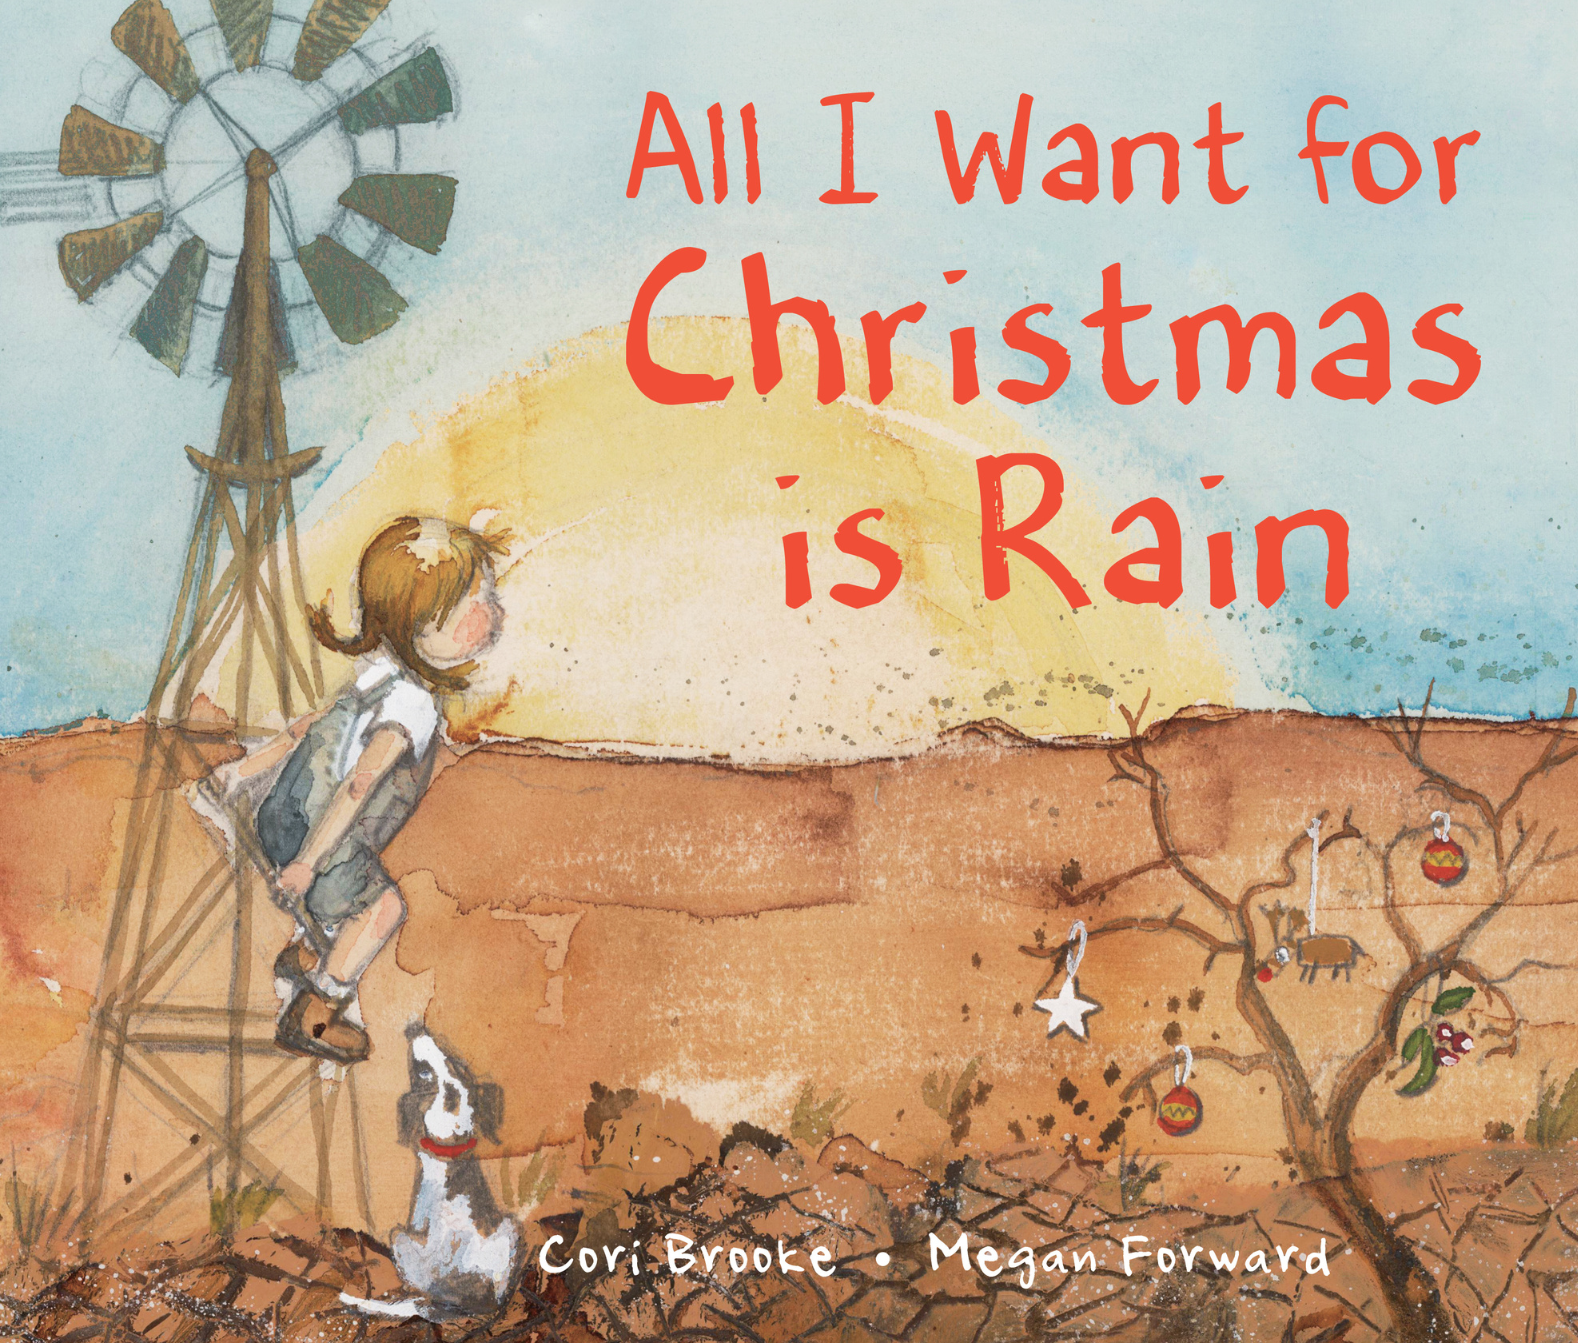 All I want for Christmas is rain book cover.